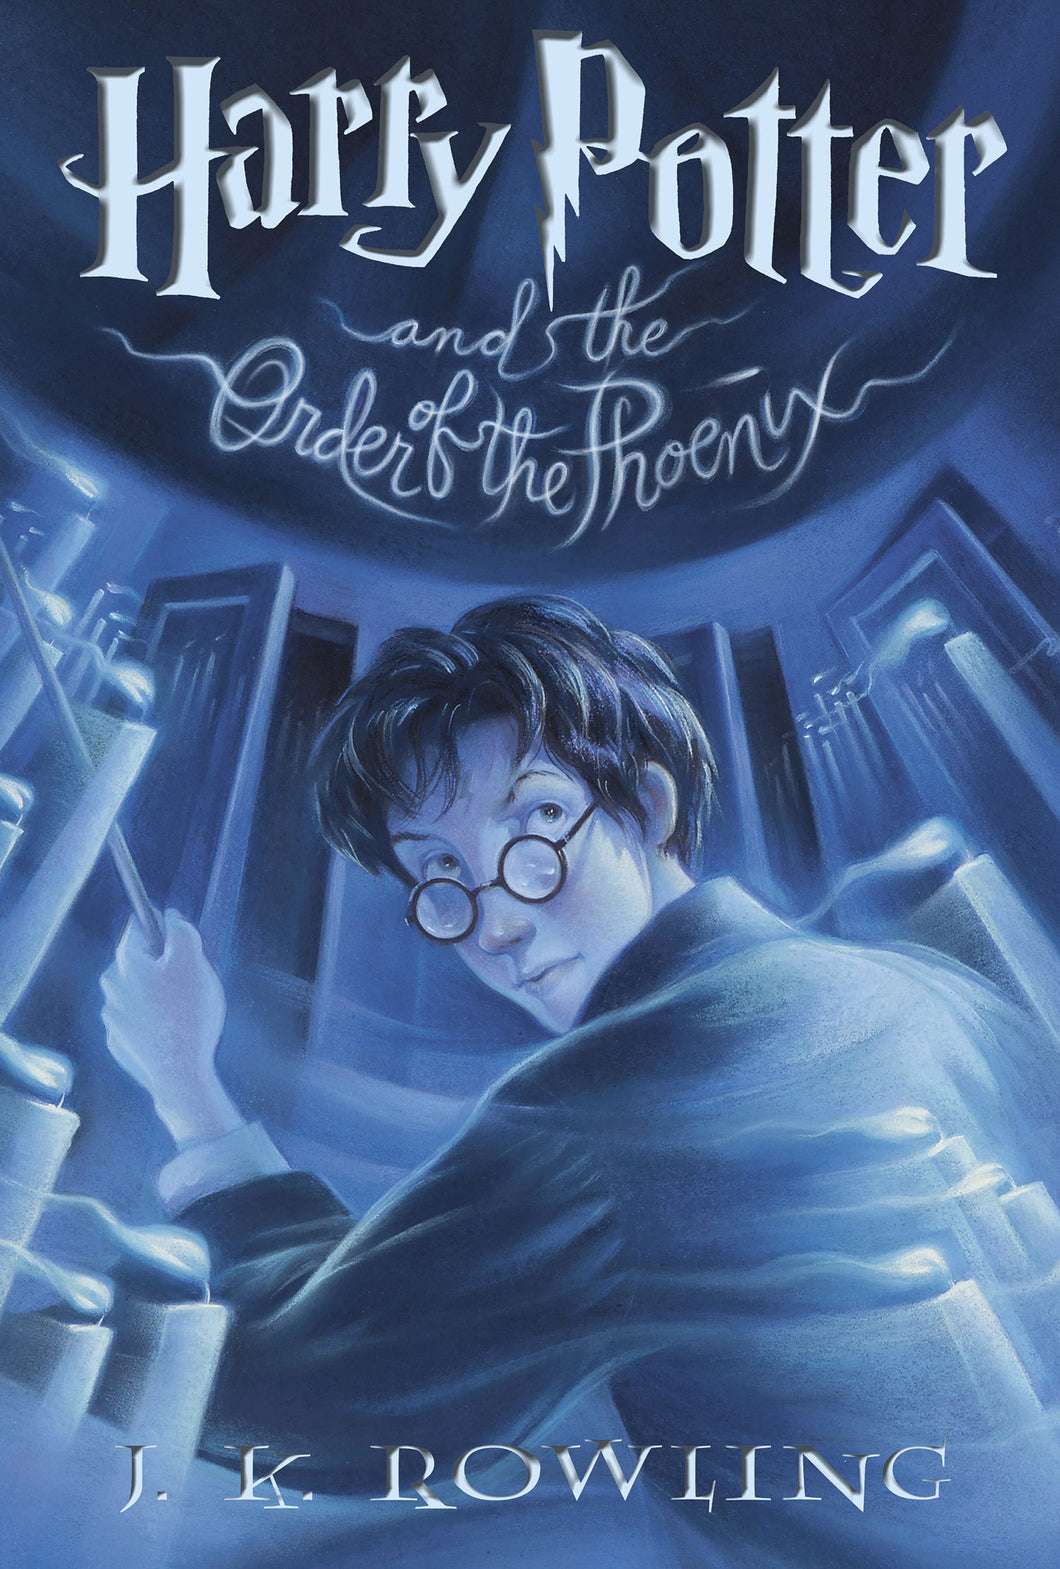 Harry Potter and the Order of the Phoenix #5 Hard Cover